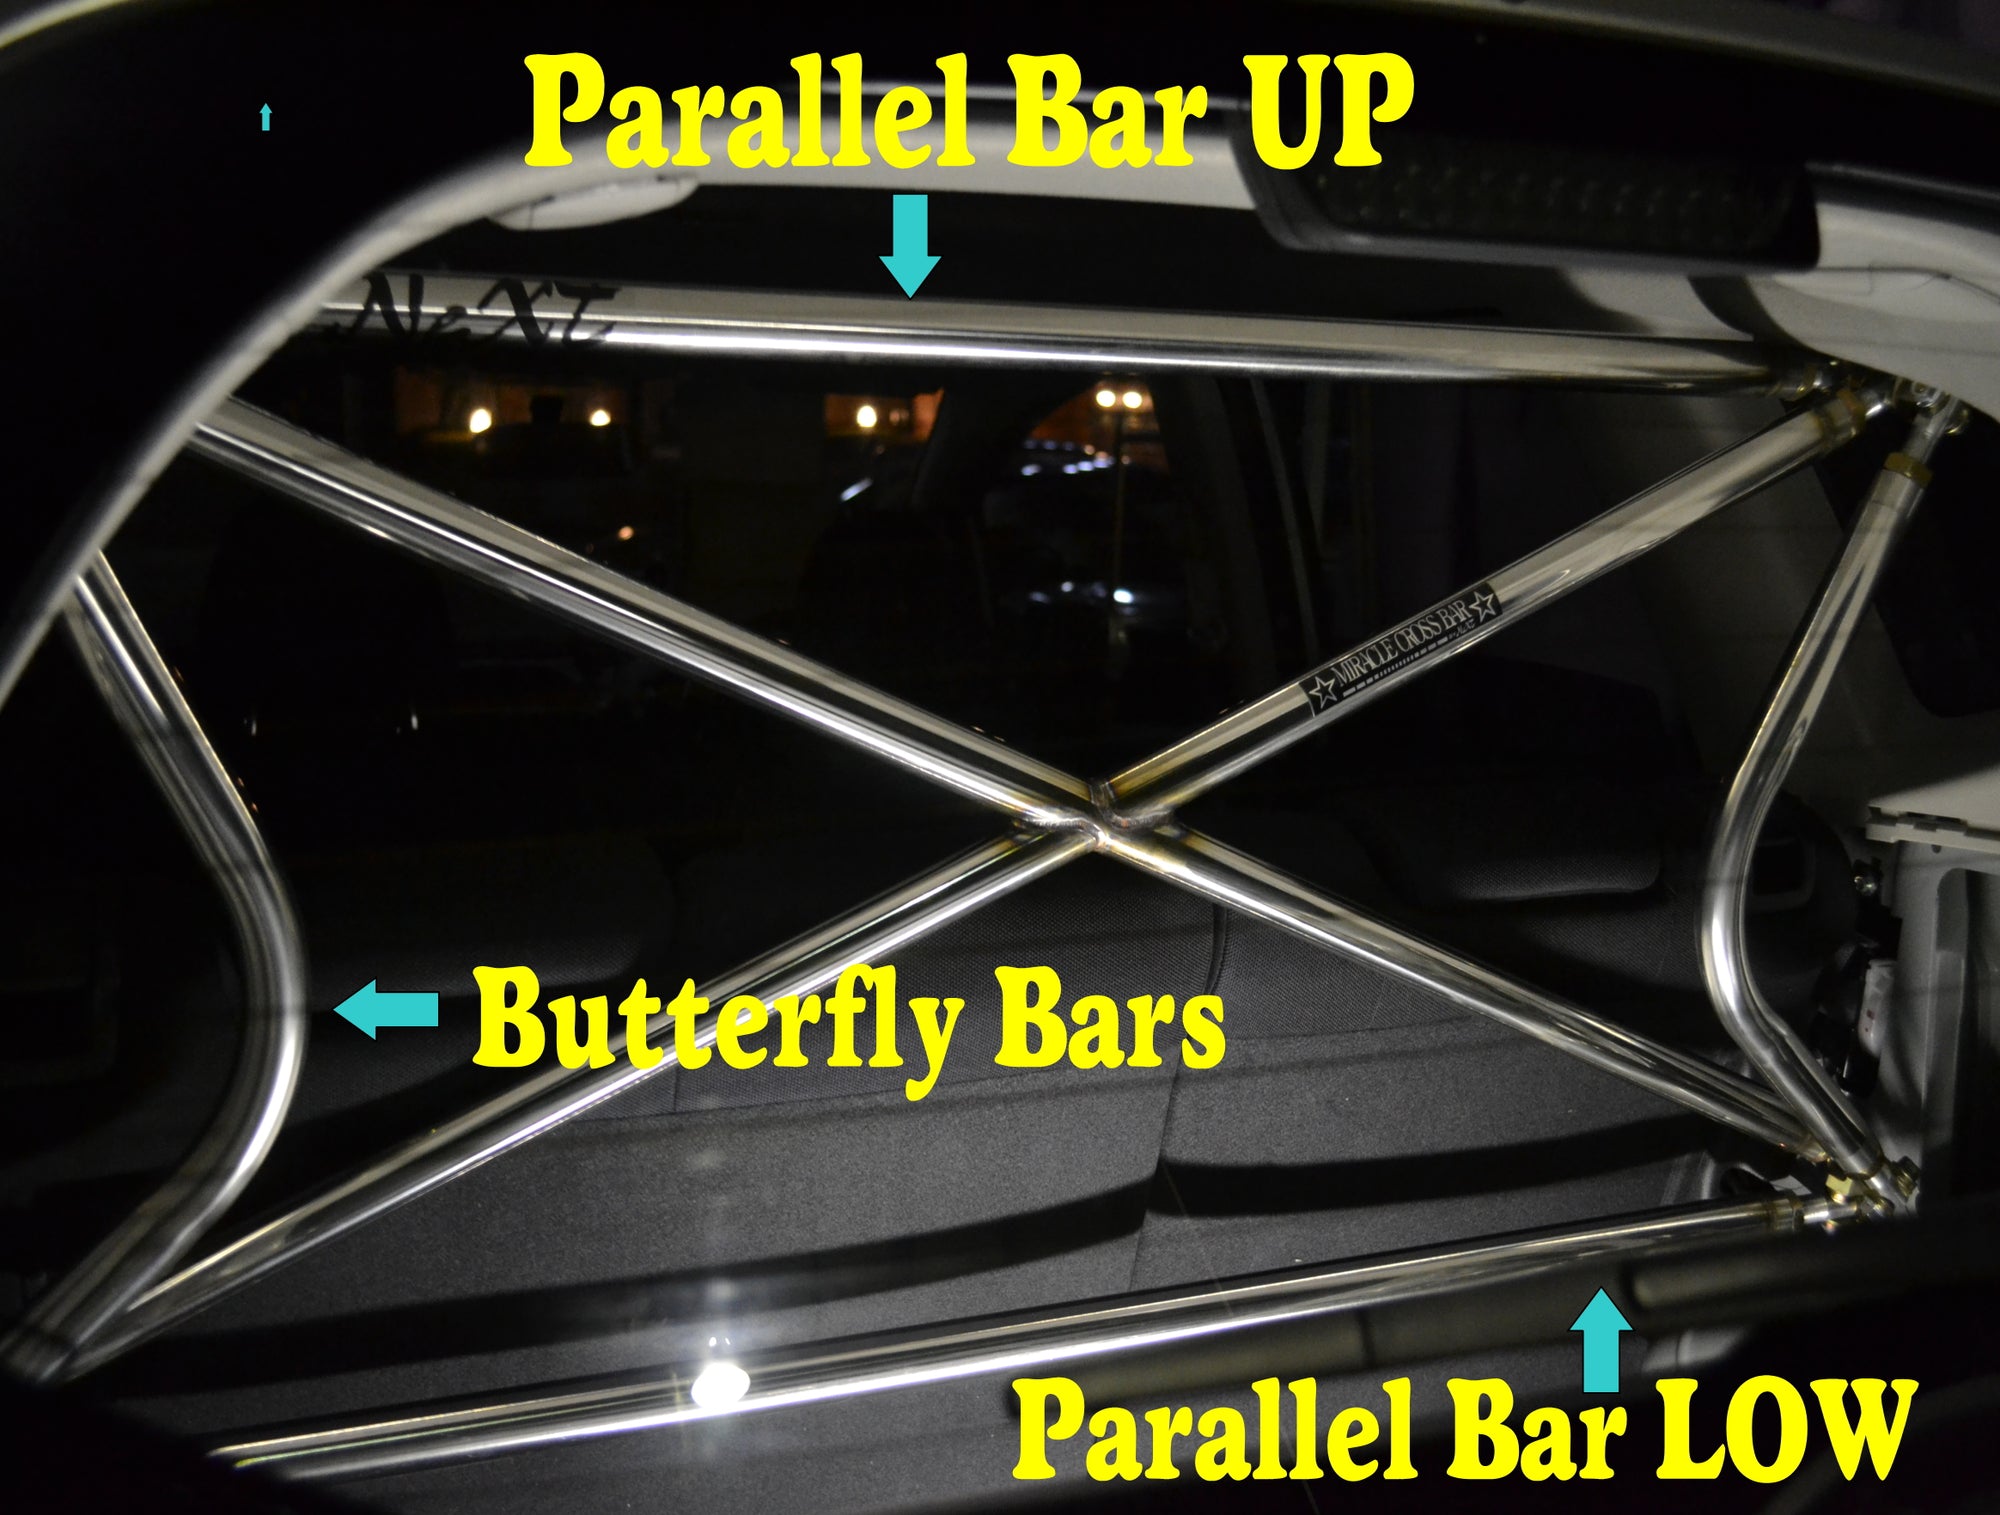 NEXT MIRACLE CROSS BAR PARALLEL BAR UP STAINLESS 32 FOR MITSUBISHI LANCER EVOLUTION 4 5 6 NEXT-01260